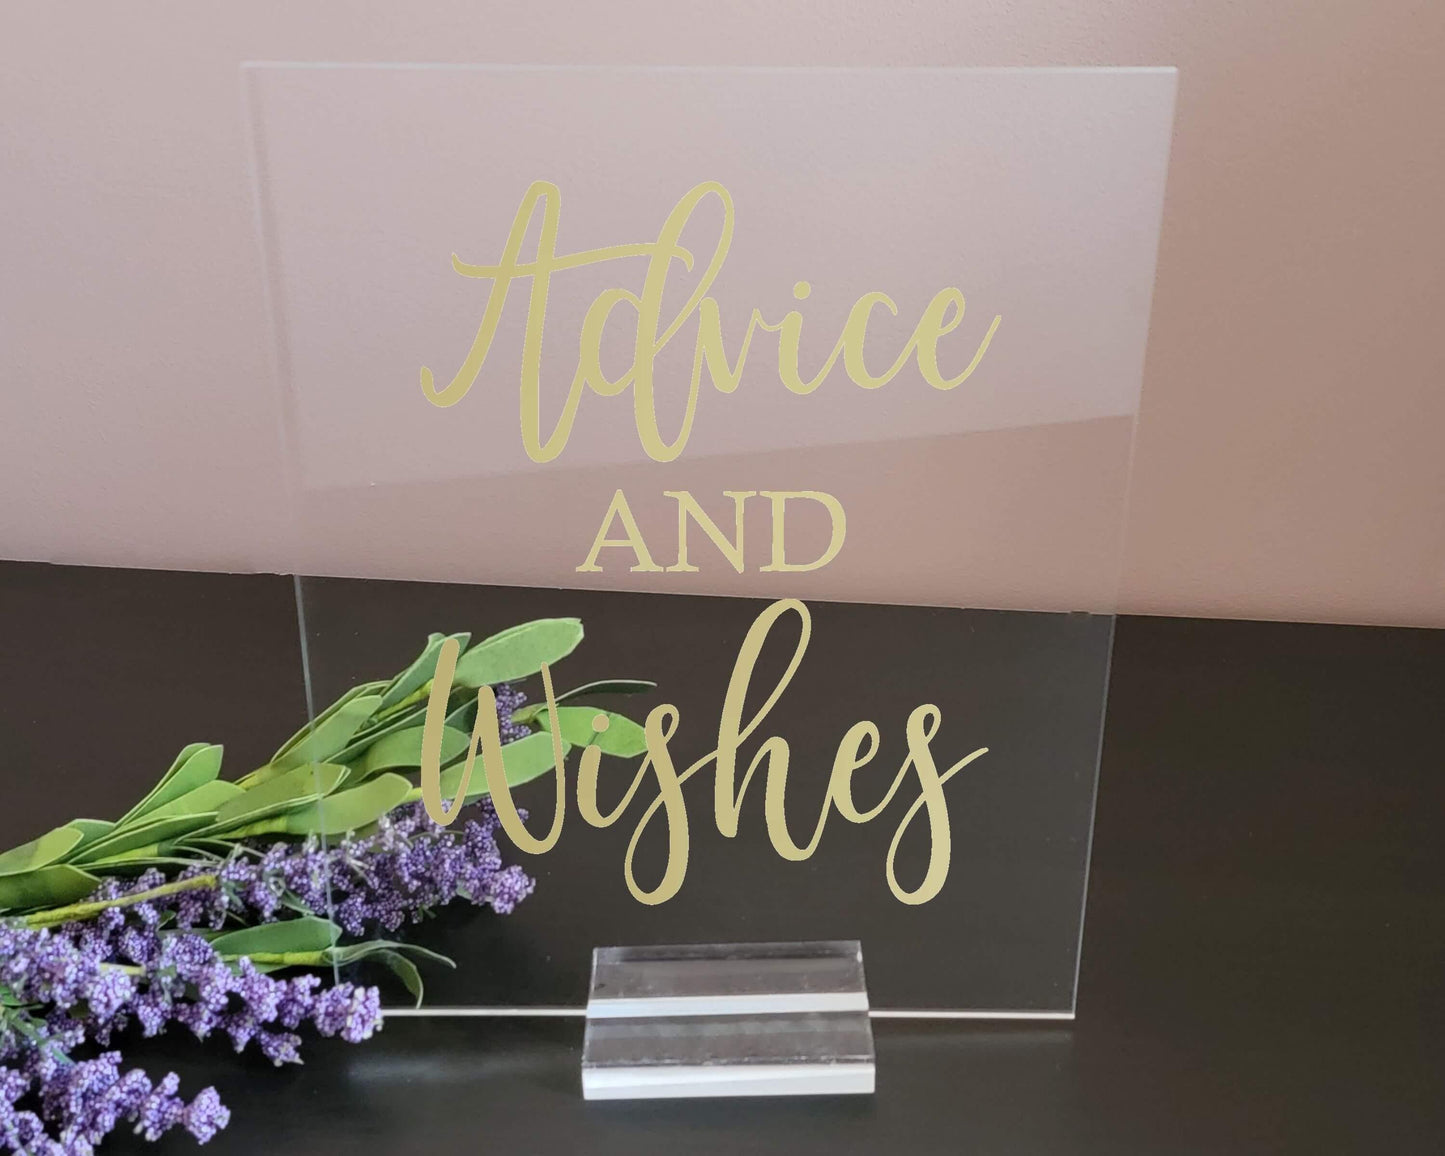 Advice and Wishes Acrylic Sign with Clear Background | 8 X 10" - Crystal Rose Design Co.